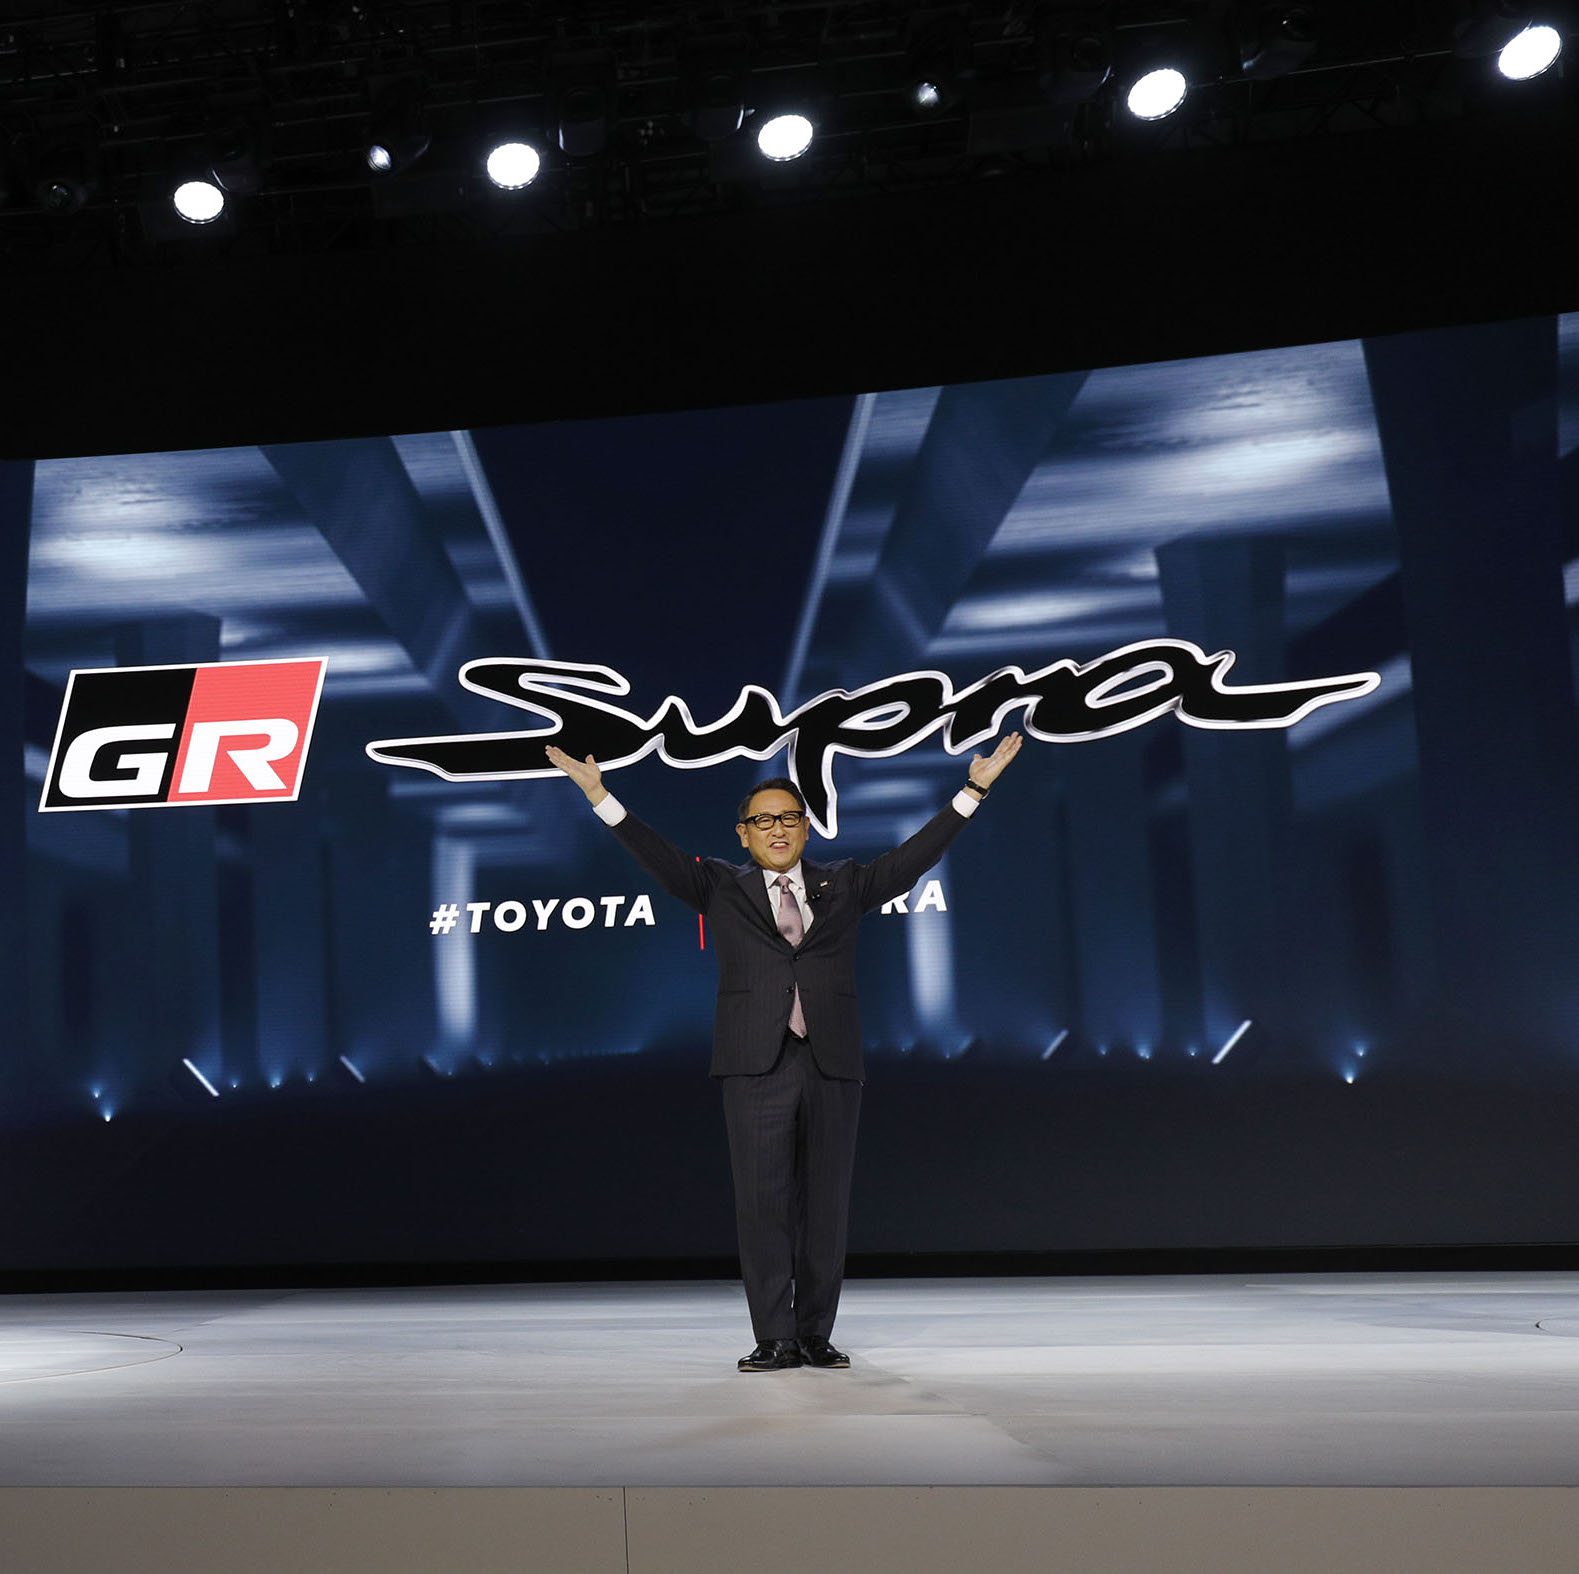 DETROIT, MI -JANUARY 14: Akio Toyoda, President of Toyota Motor Corporation, stands with The 2020 Toyota Supra rear-wheel-drive sports coupe at its reveal at the 2019 North American Internati